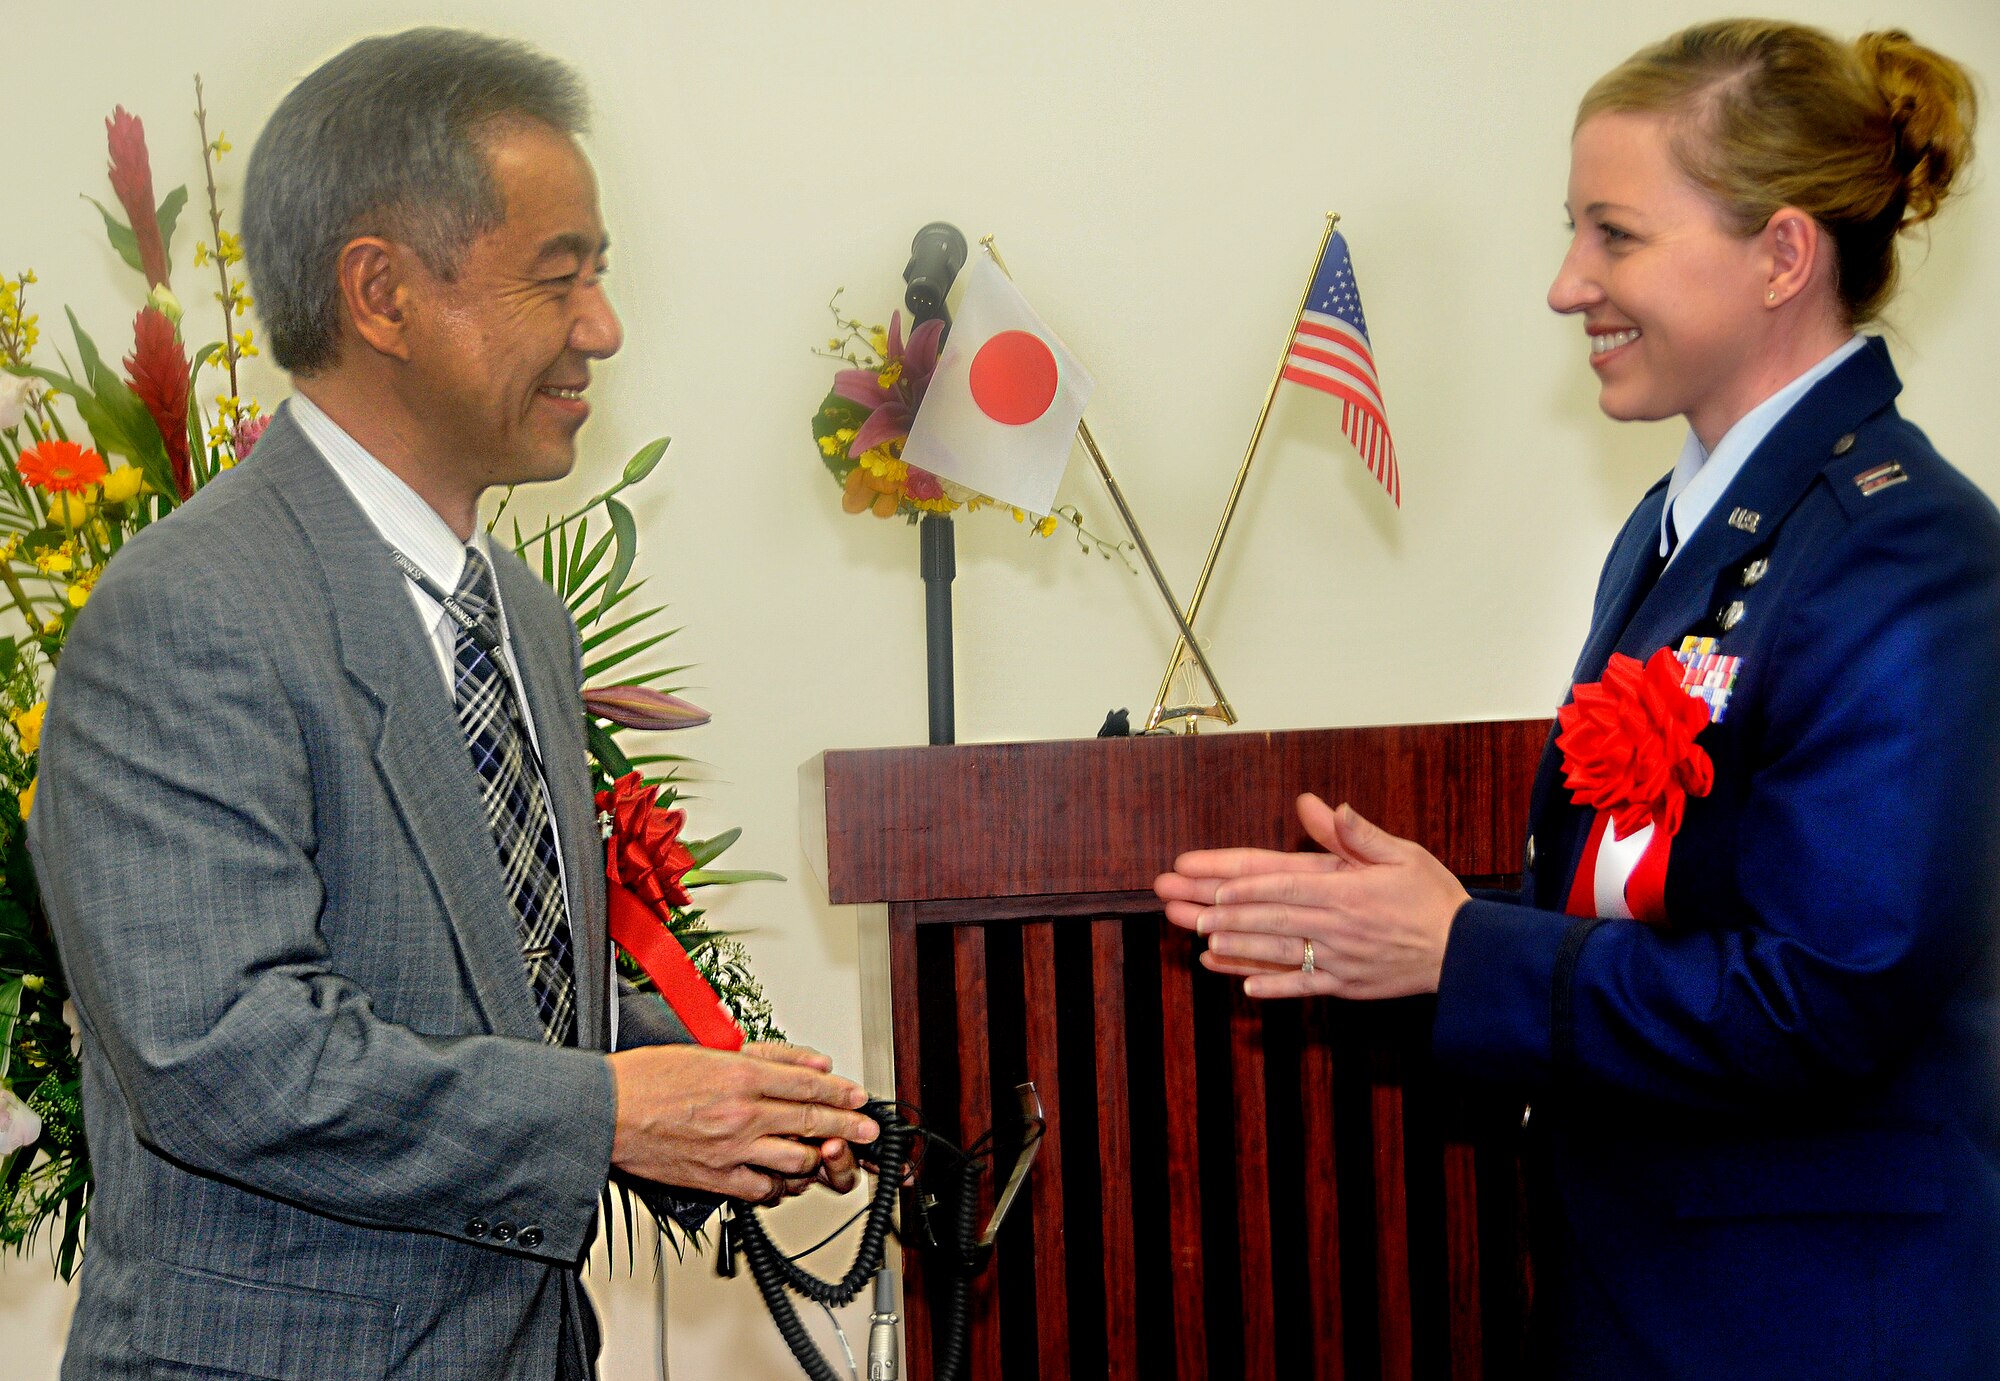 Mr. Masahiro Muroya, Director General, Okinawa Air Traffic Services Department, and Capt. Brooke Kelly, Kadena Airfield Operations flight commander, exchange a symbolic air traffic controller headset at a ceremony marking the reversion of Kadena radar approach control to the Japanese. The RAPCON transfer ceremony took place at Naha Airport, Okinawa, March 30. (U.S. Air Force photo / Airman 1st Class Jarvie Wallace)